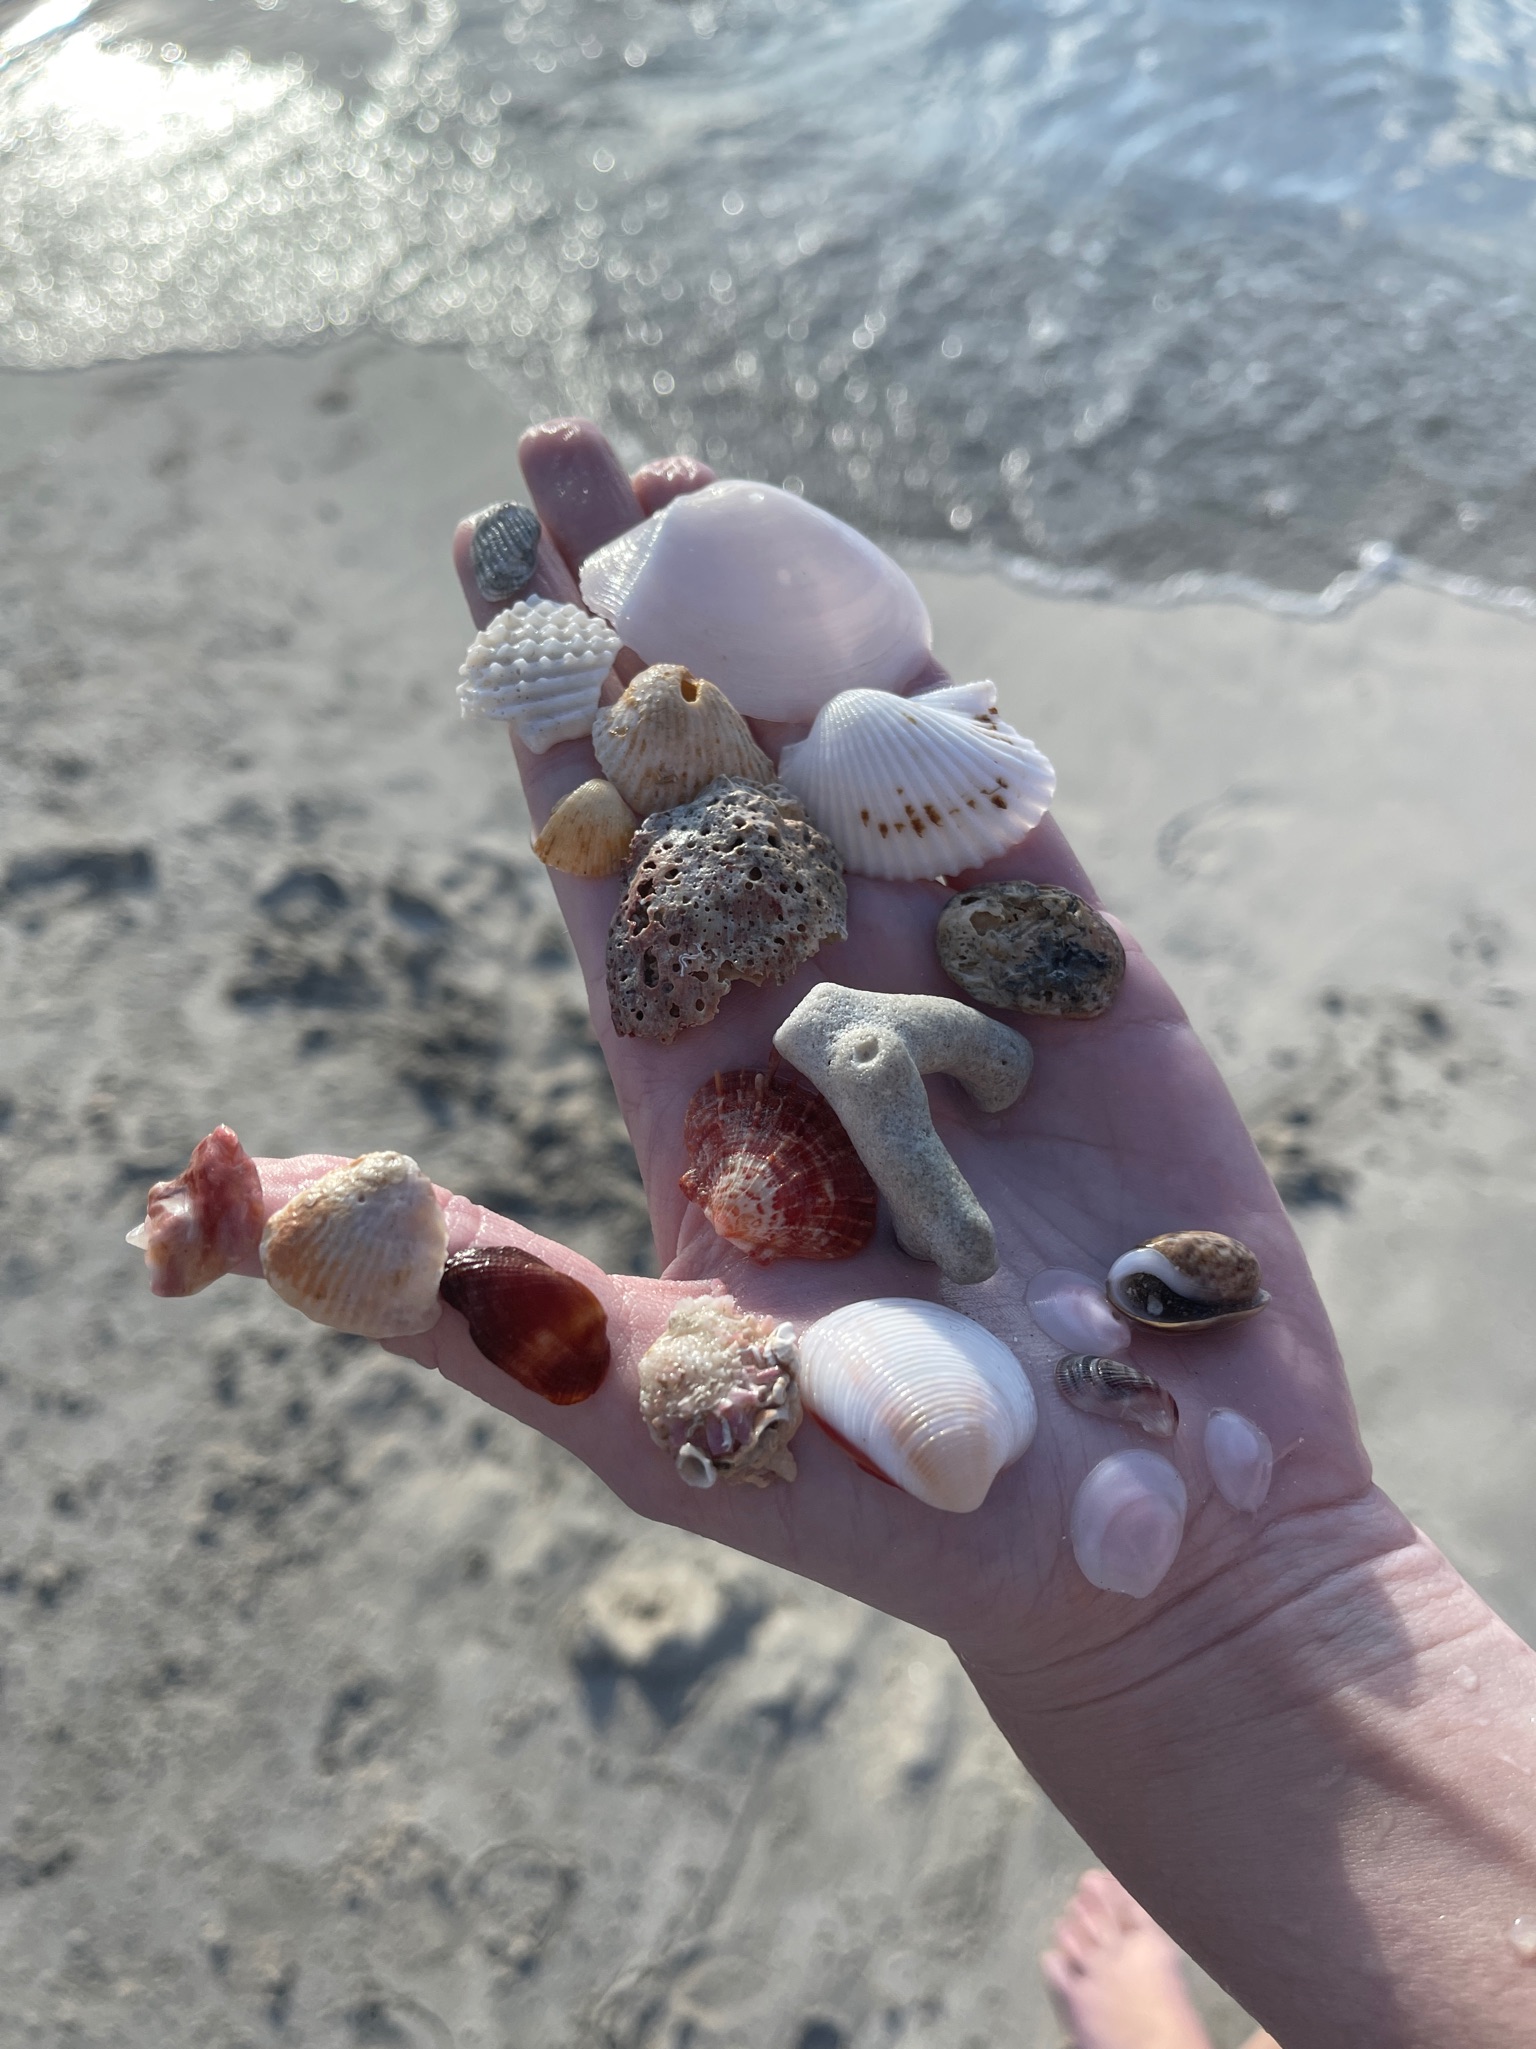 Multiple shells and coral found at Magens bay beach